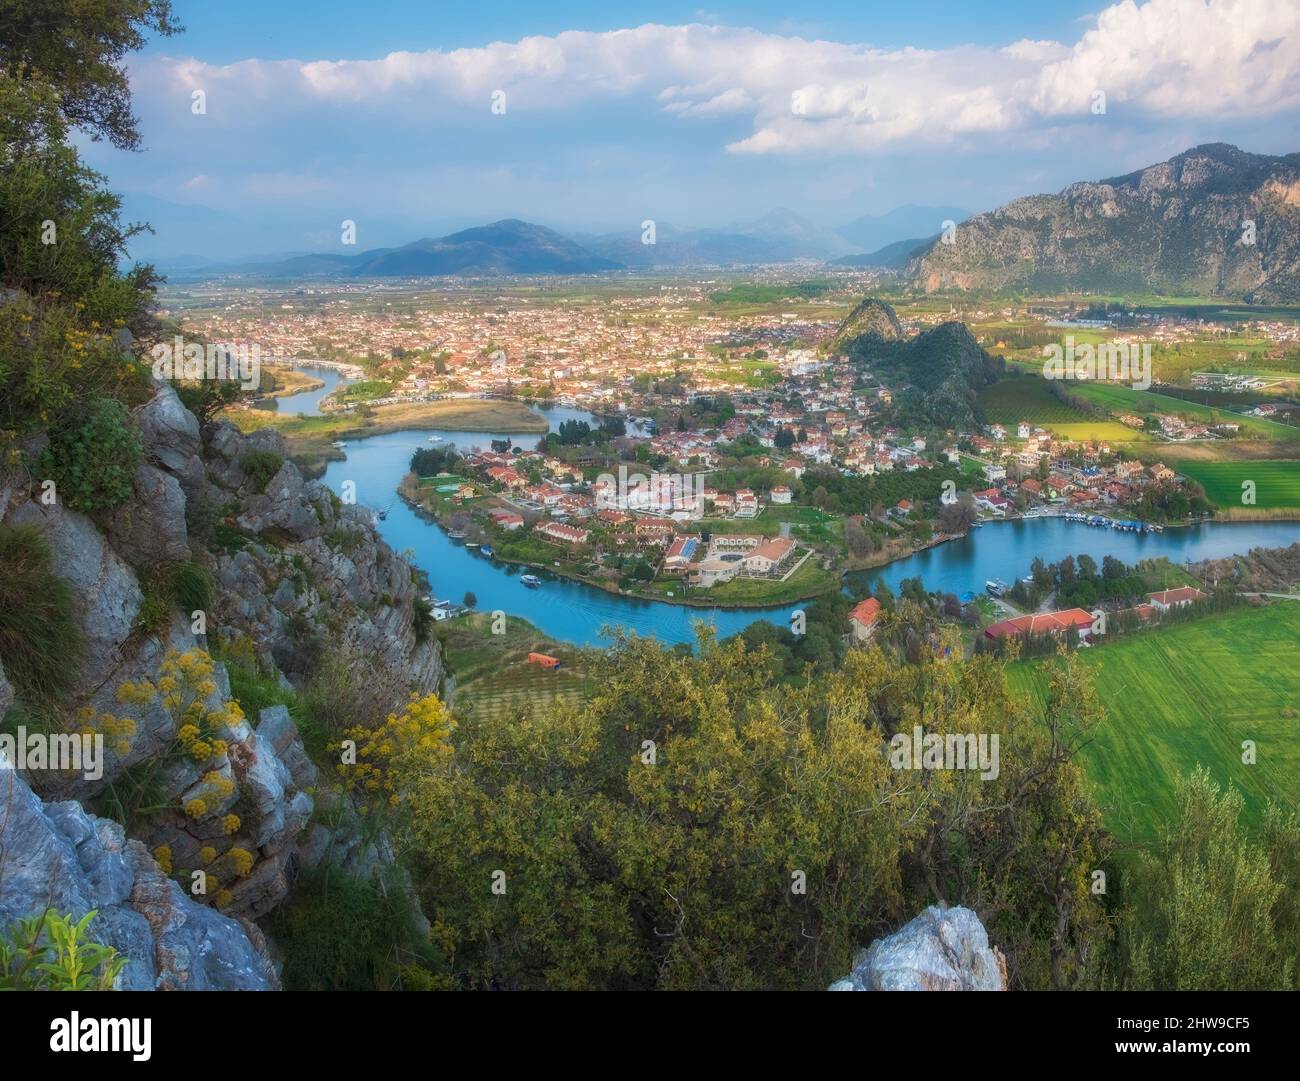 A beautiful panorama of the Dalyan river valley with a view of the town, mountains and river from the view point of the ancient city of Kaunos Stock Photo